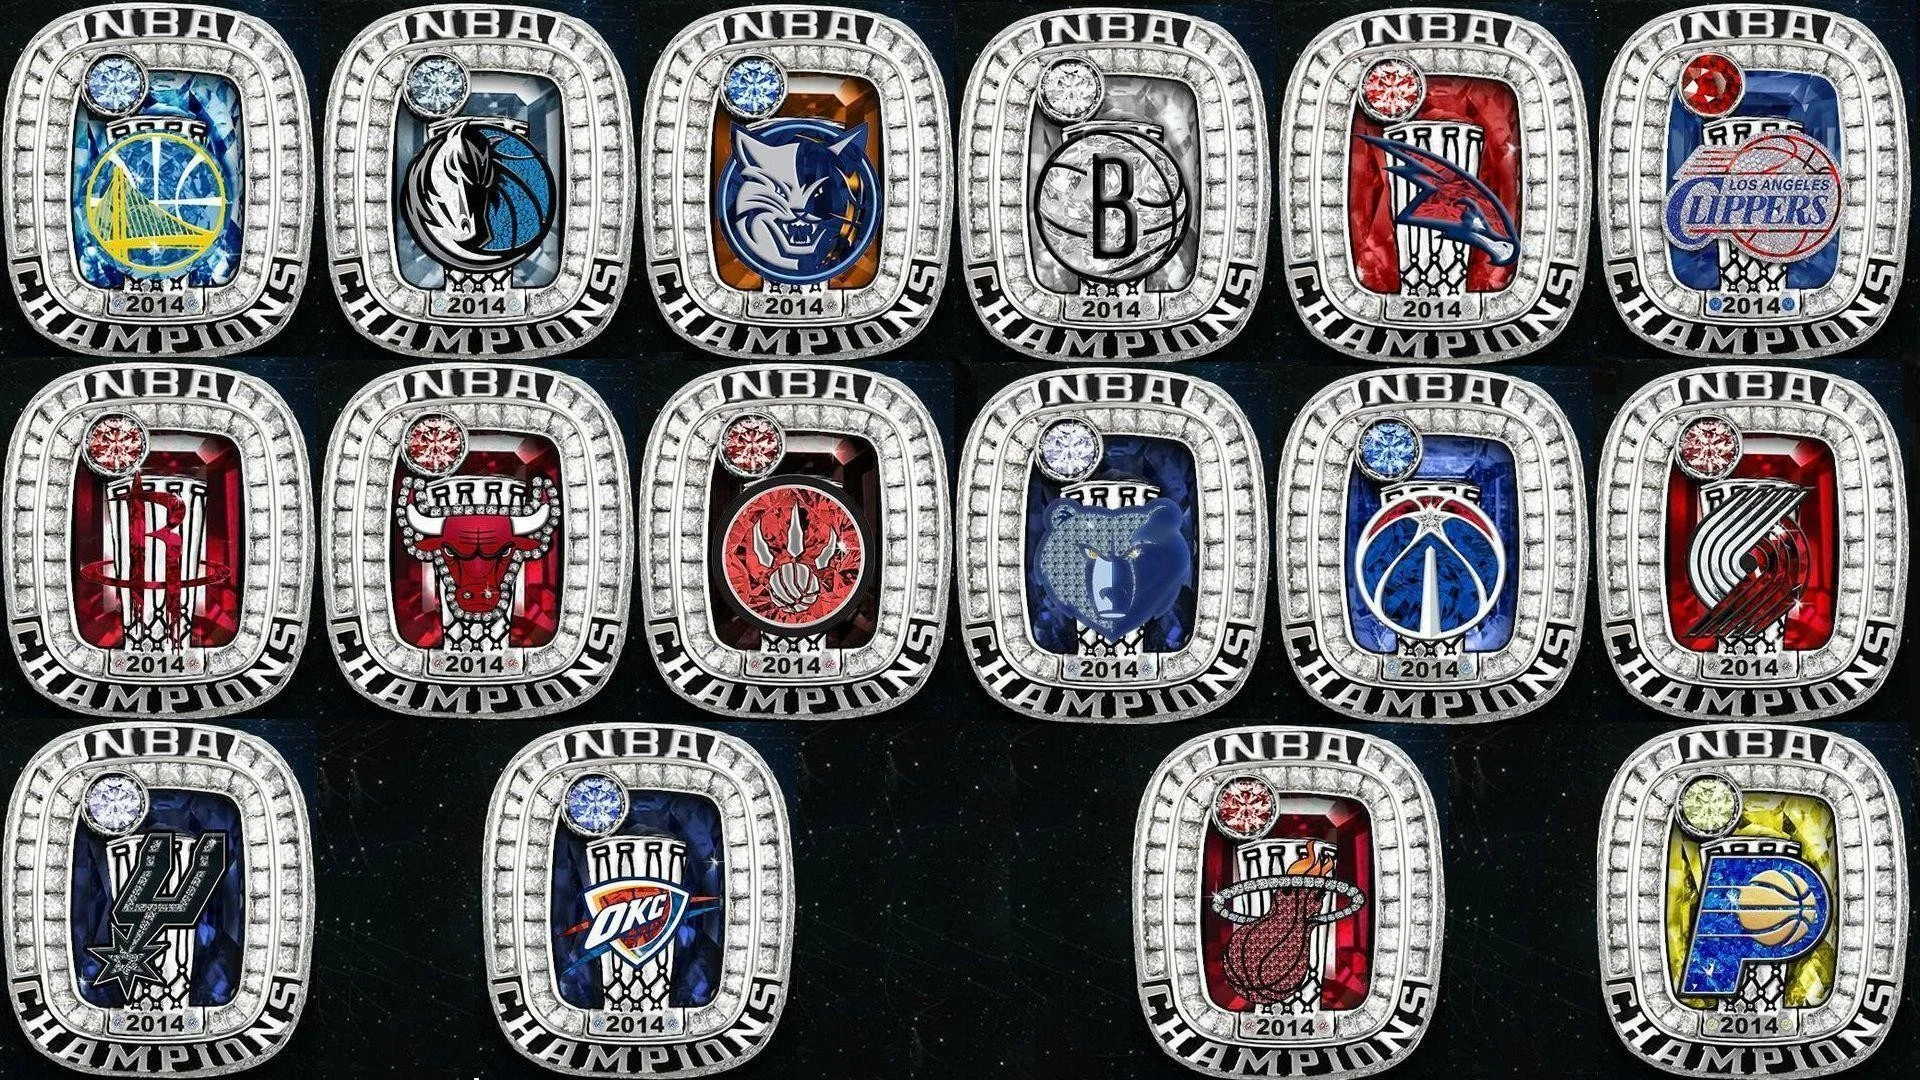 The NBA tweeted out 2014 championship rings for each team nba